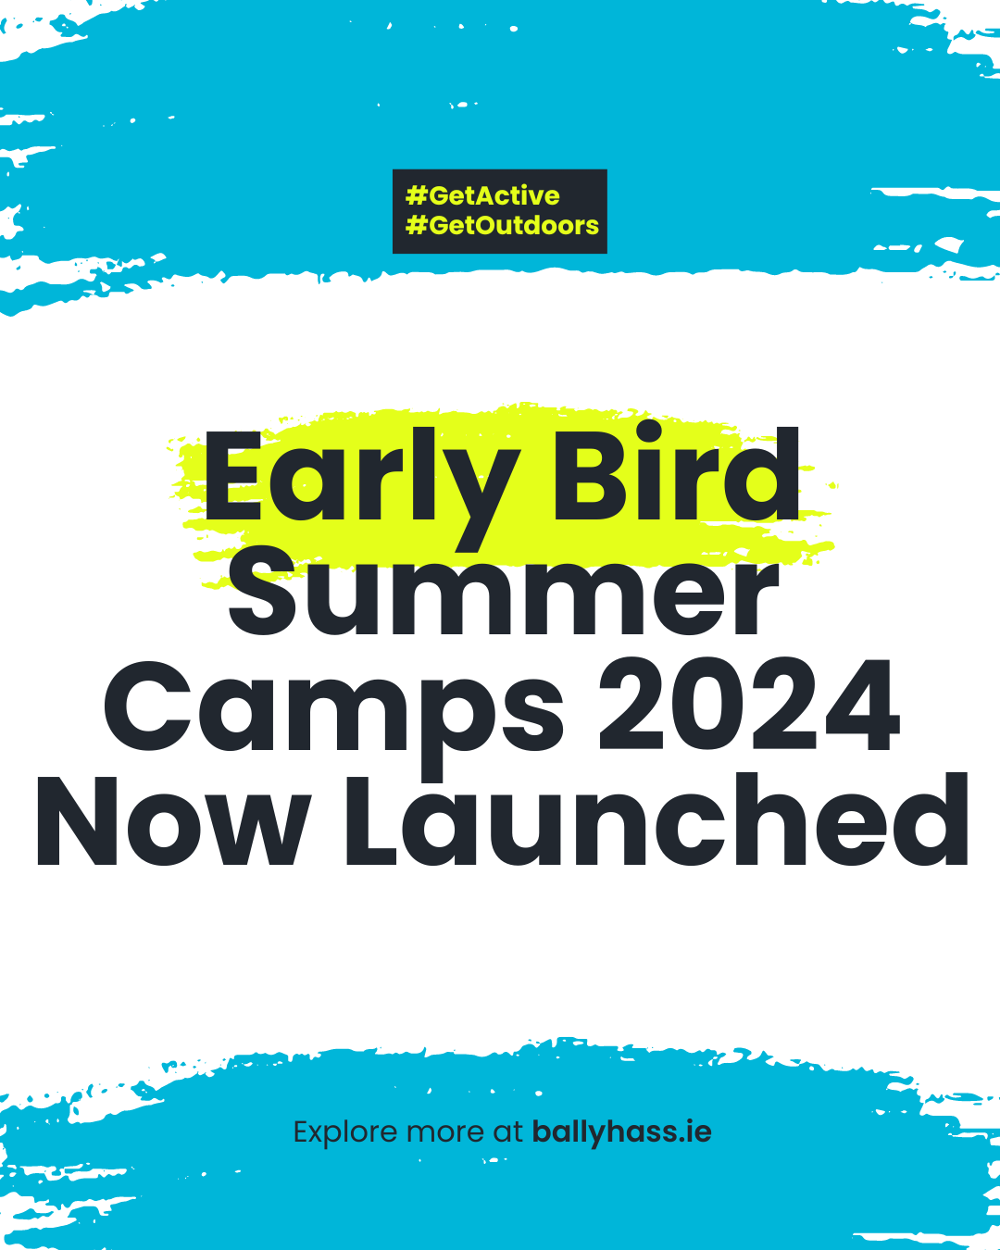 Early Bird Summer Camp Prices are Here for Summer 2024!